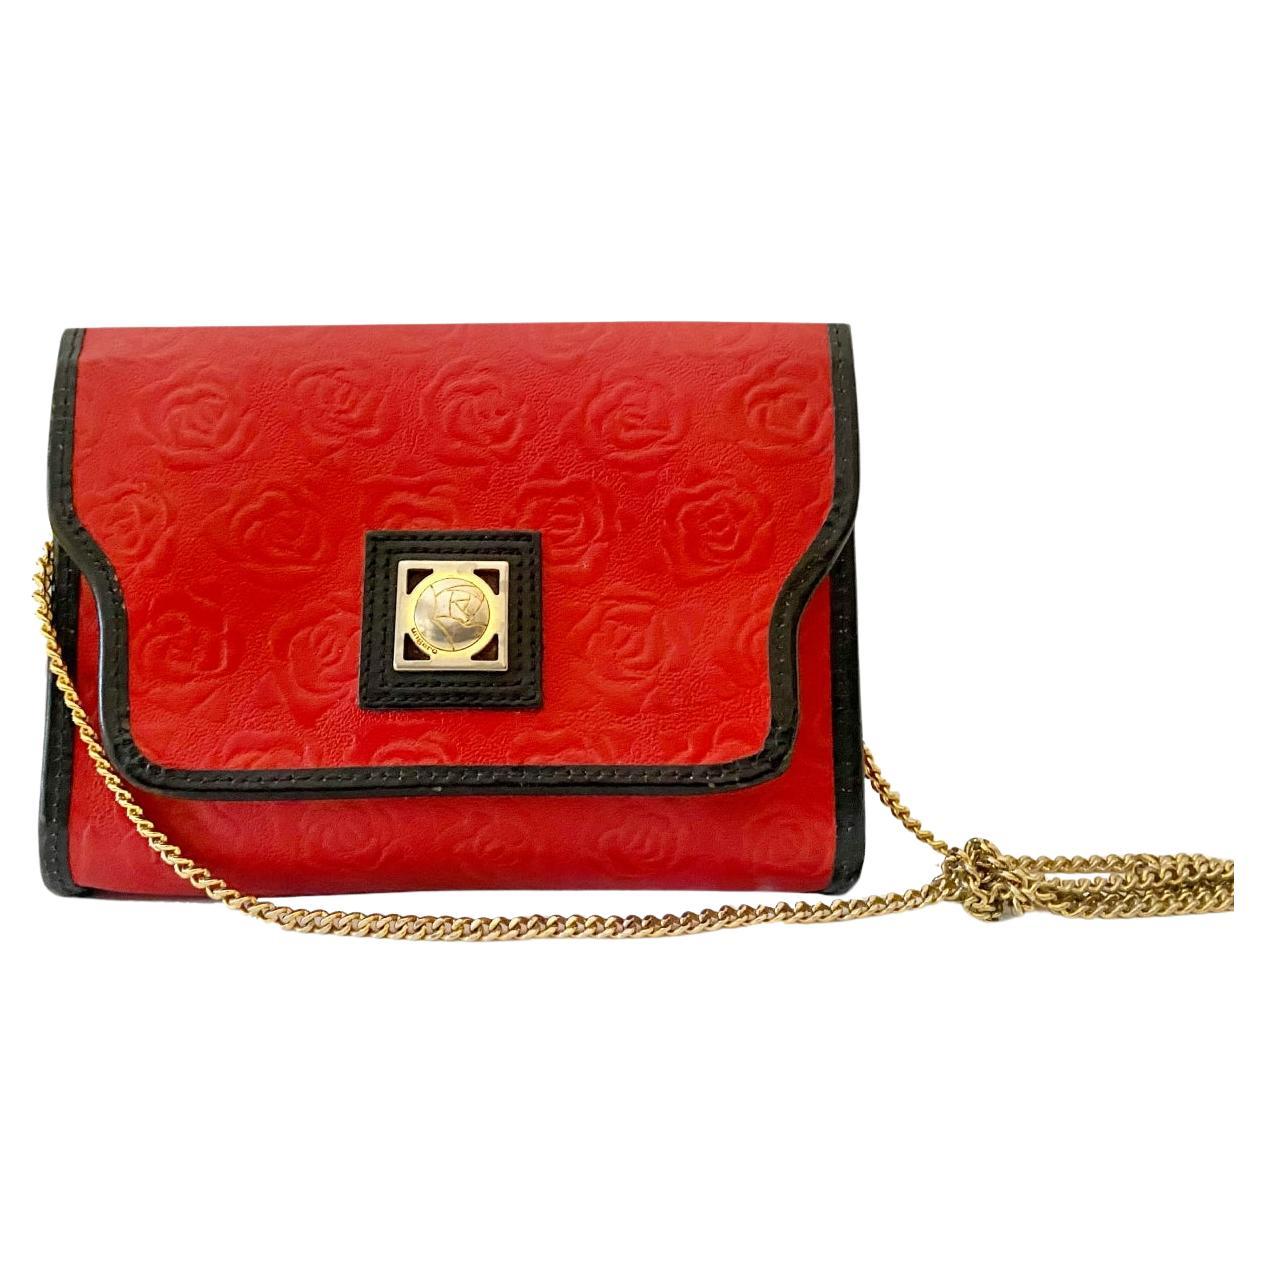 Parisian opulence in this 1980s Ungaro Paris Red Embossed Shoulder bag with gold chain, the sumptuous red embossed leather, accented with sleek black details, radiates sophistication and refinement. Adorned with shimmering gold-tone hardware, the